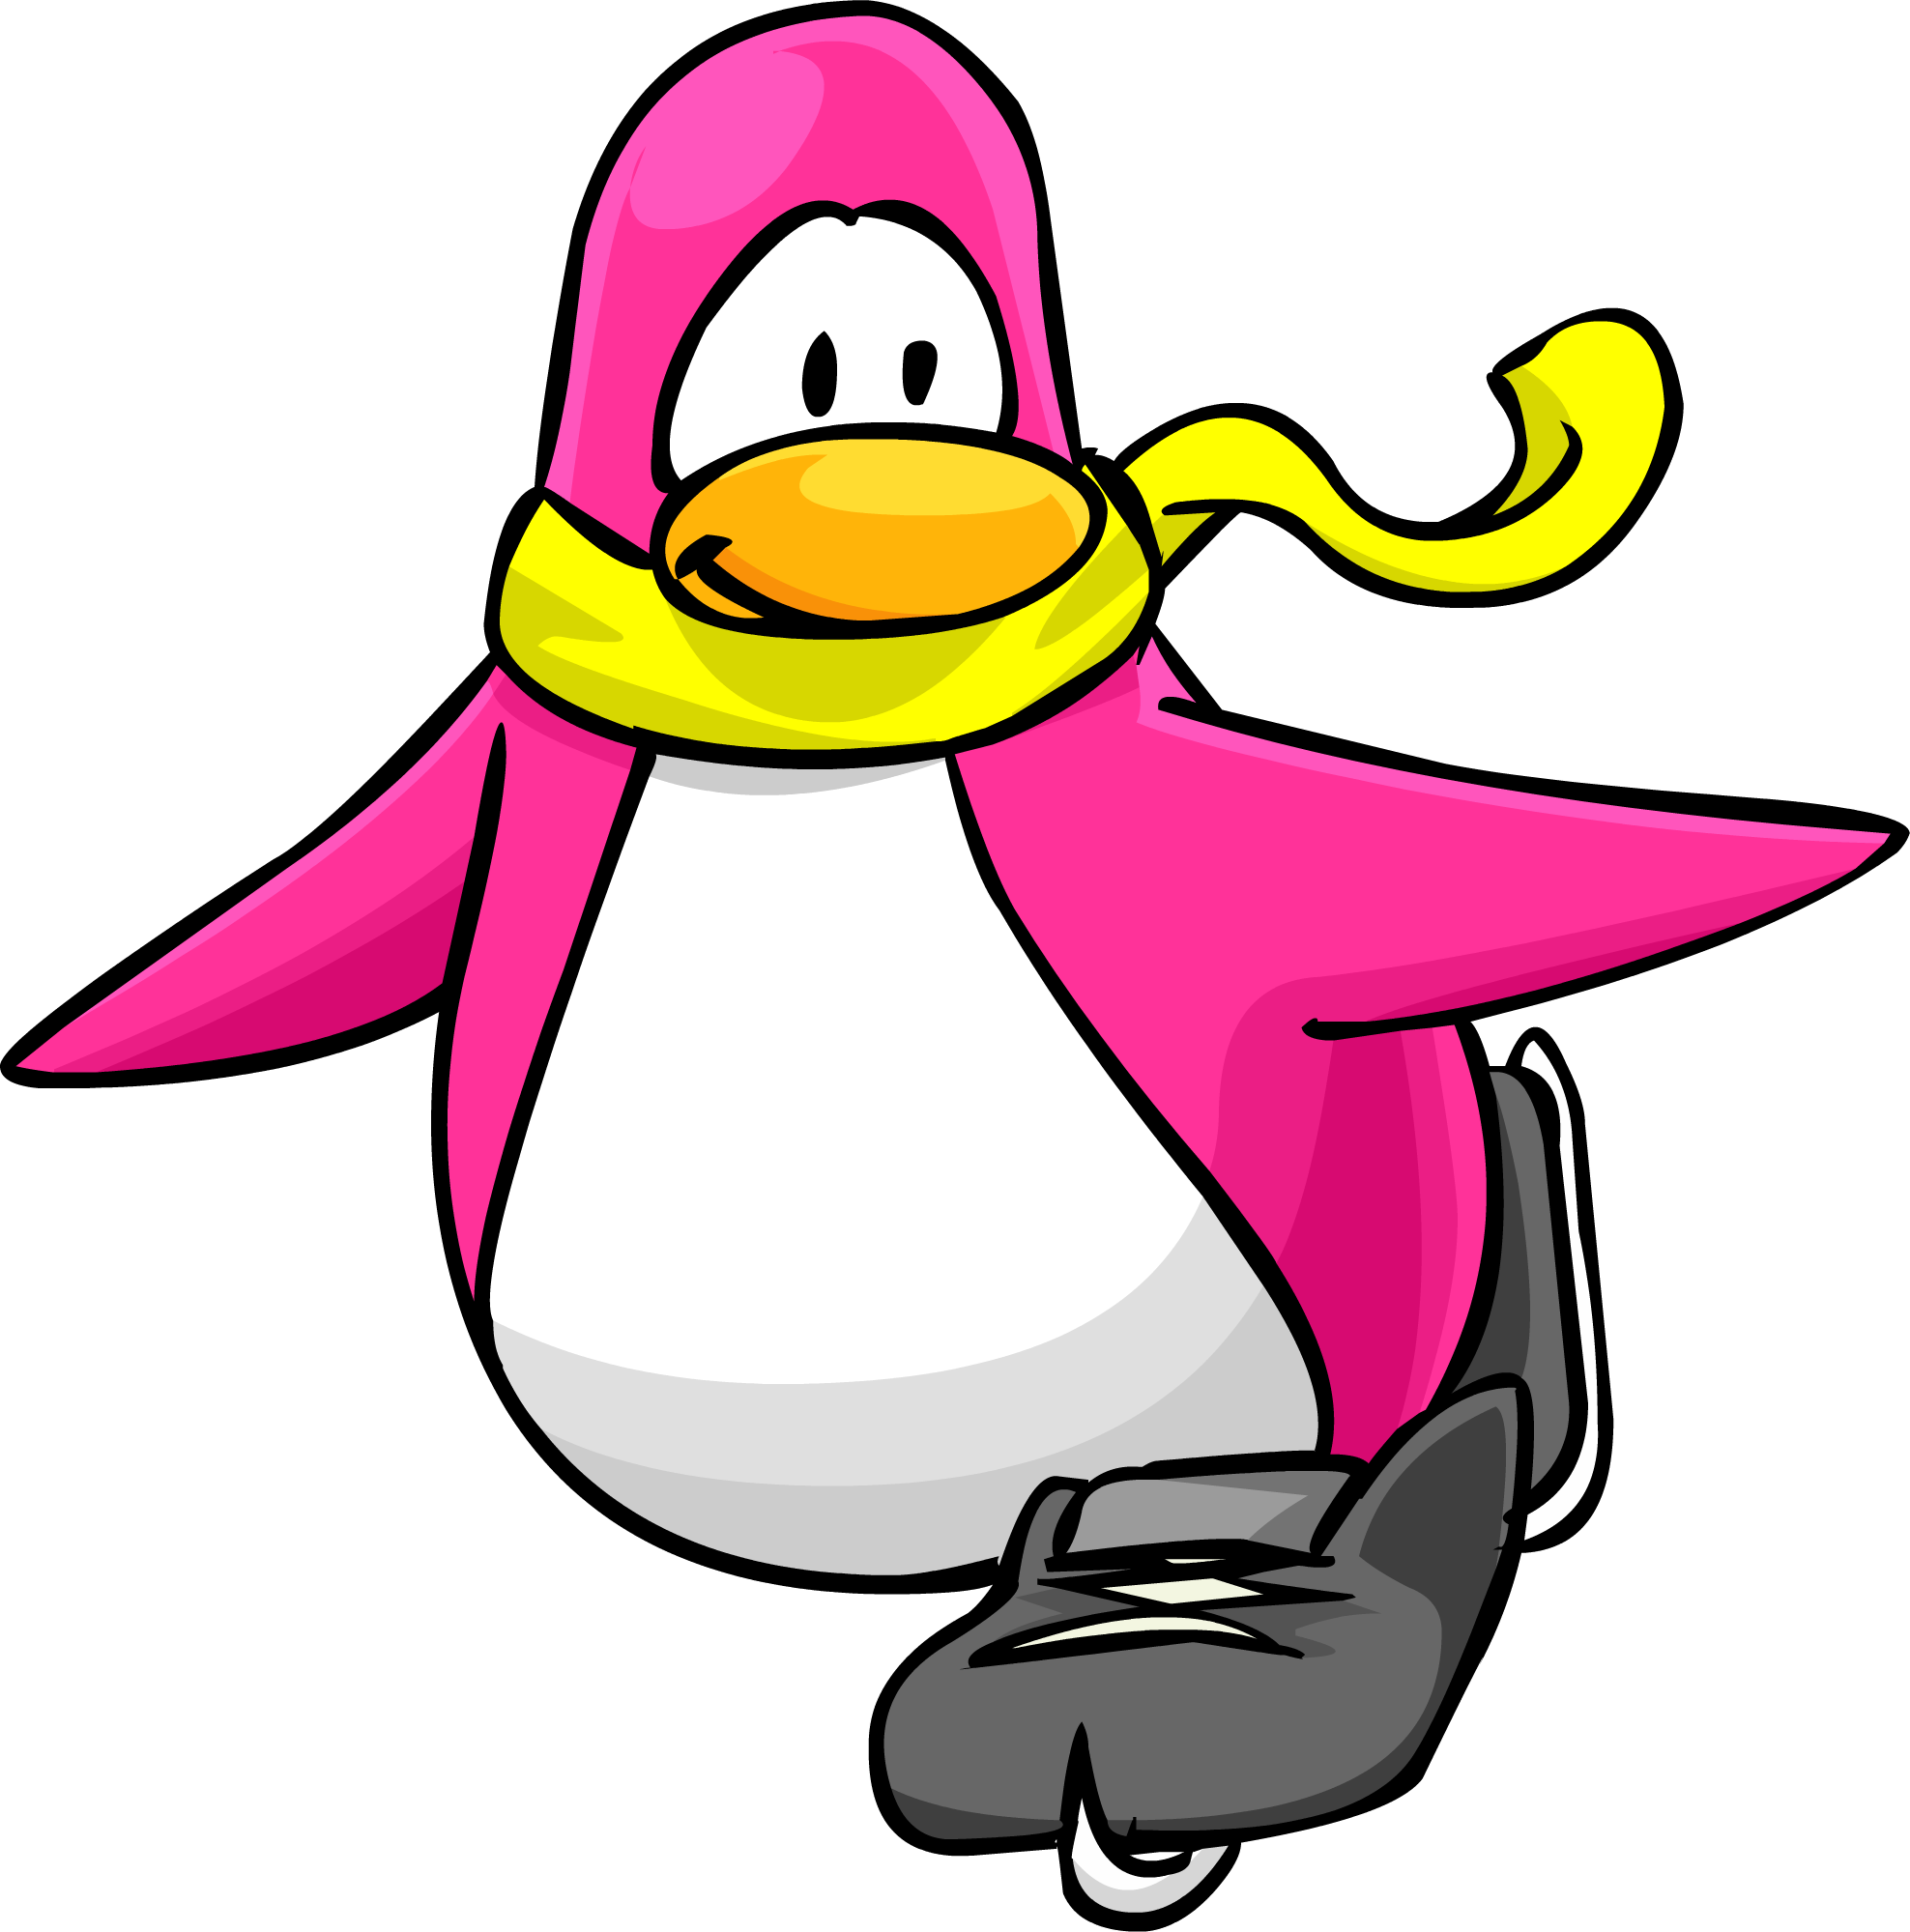 Yellow Scarf Penguin Times 114 - Club Penguin With Scarf (1976x1999)